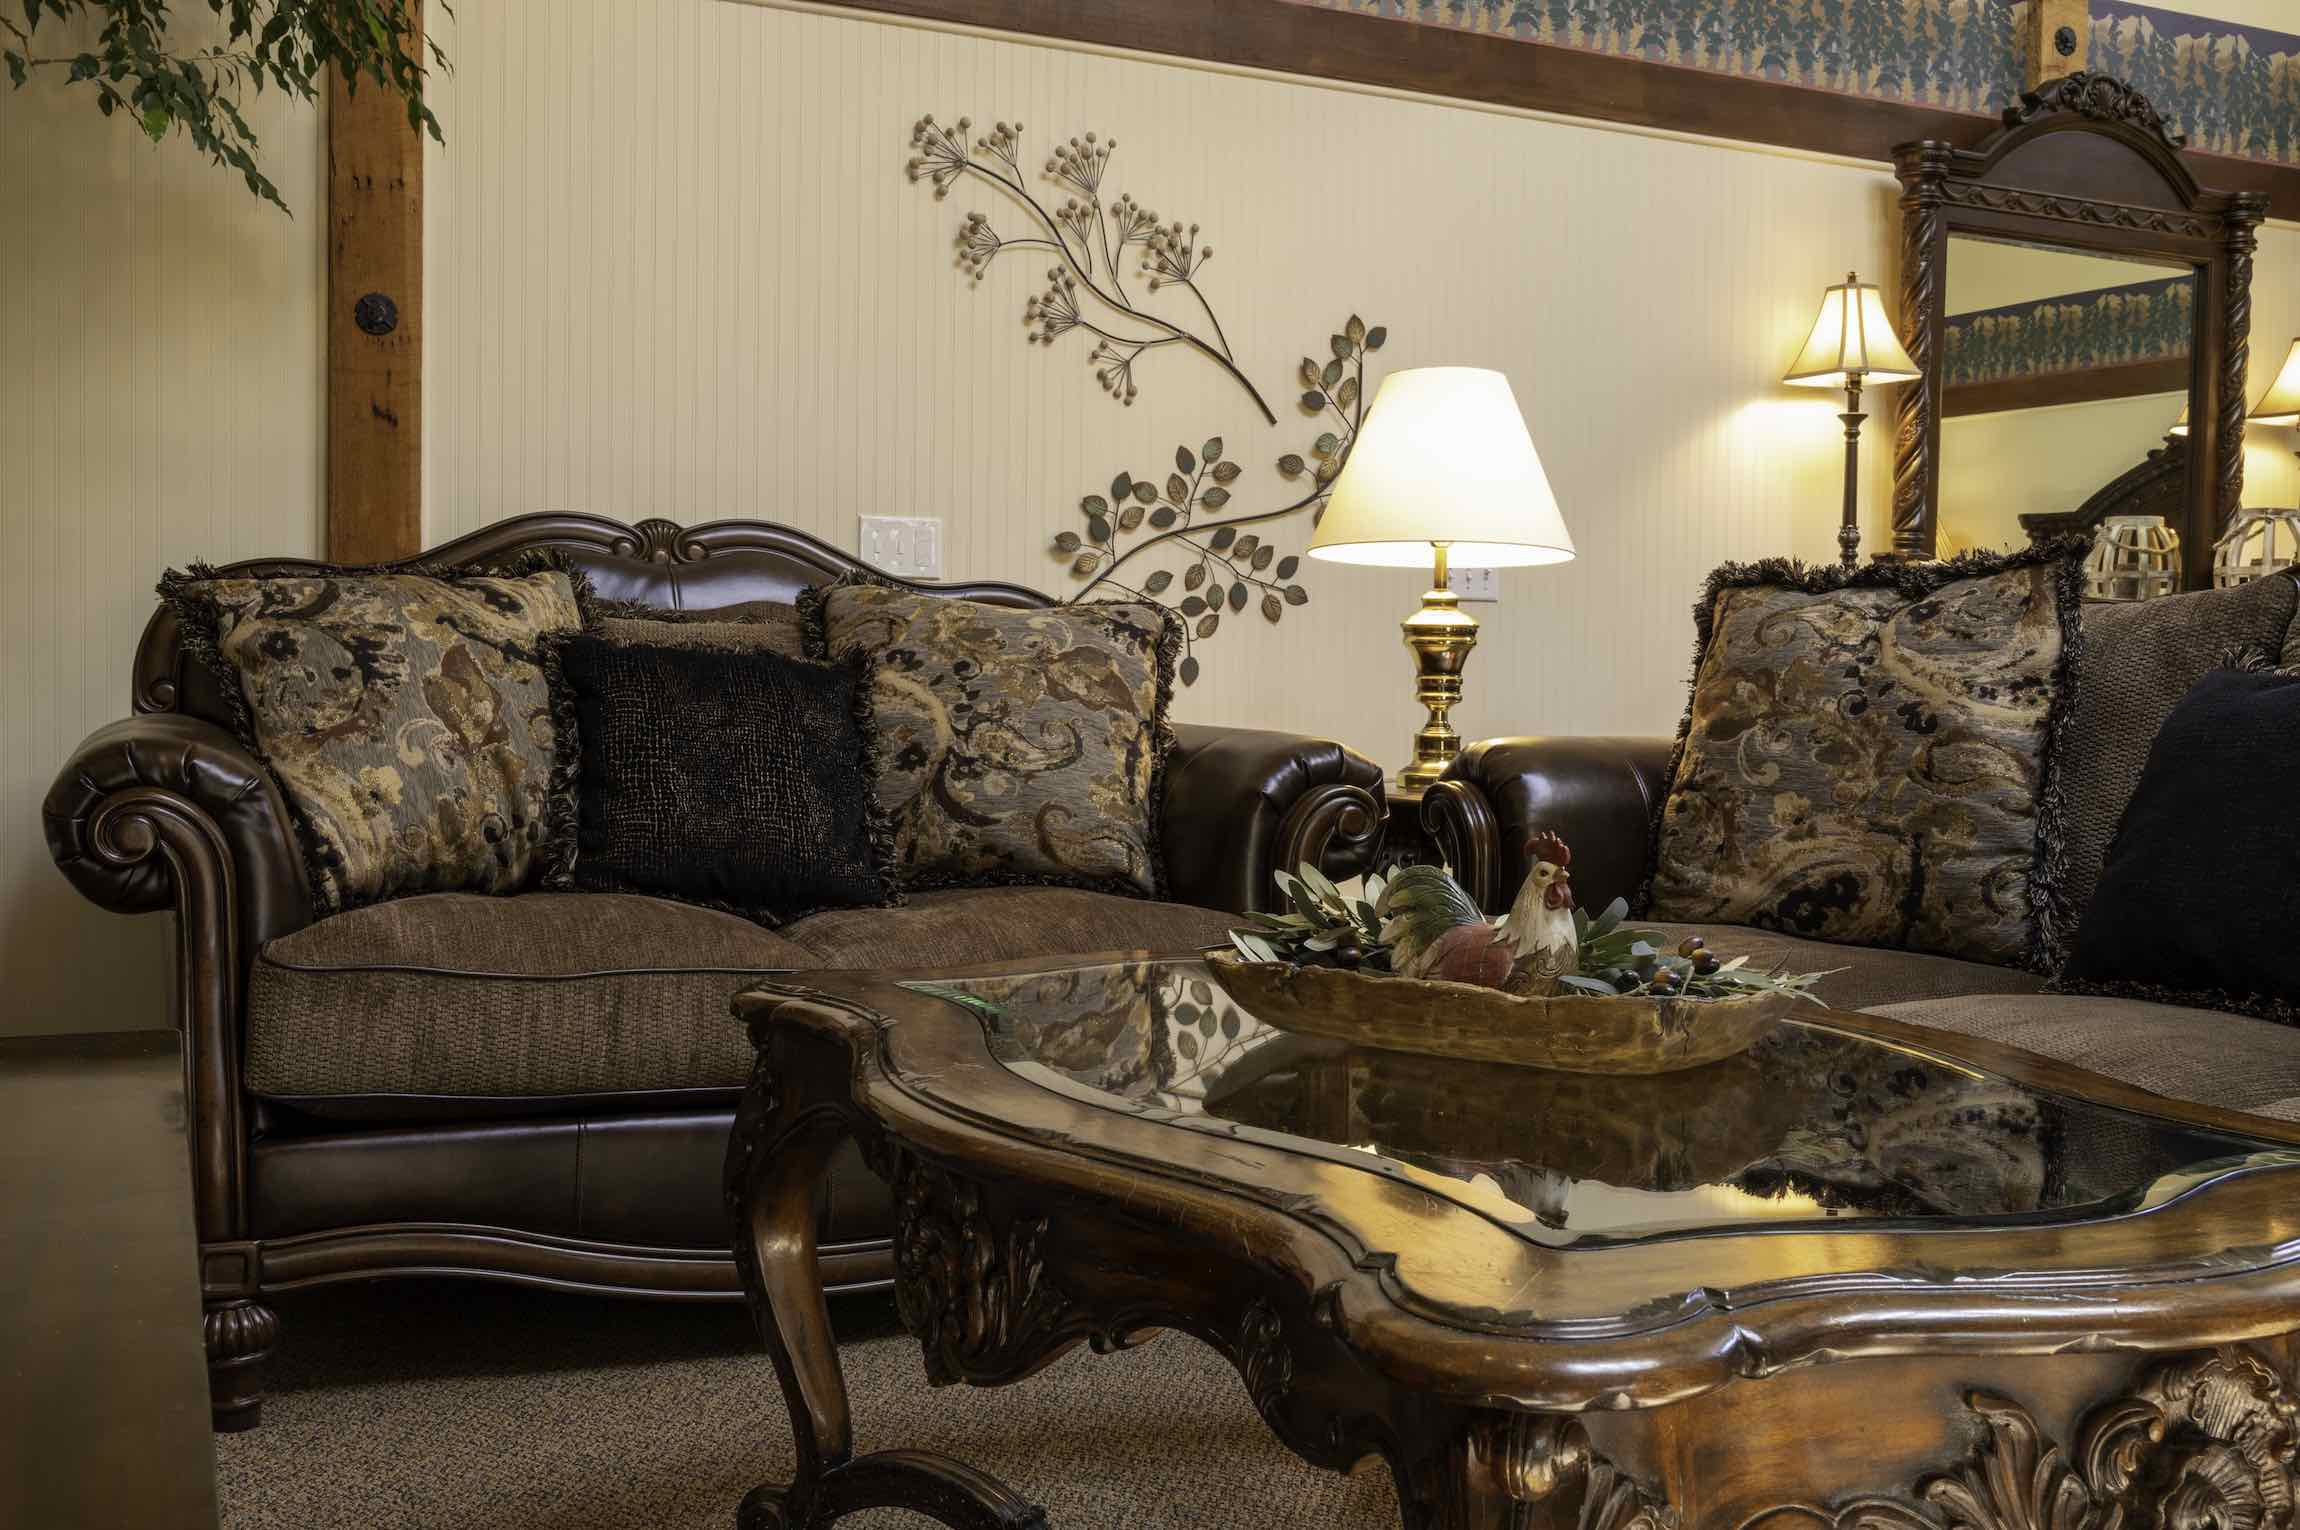  A fireplace warms the living room of the Pine Ridge Suite at Country Willows Inn & Estate in Ashland, Oregon. The Pine Ridge Suite is our largest suite. 